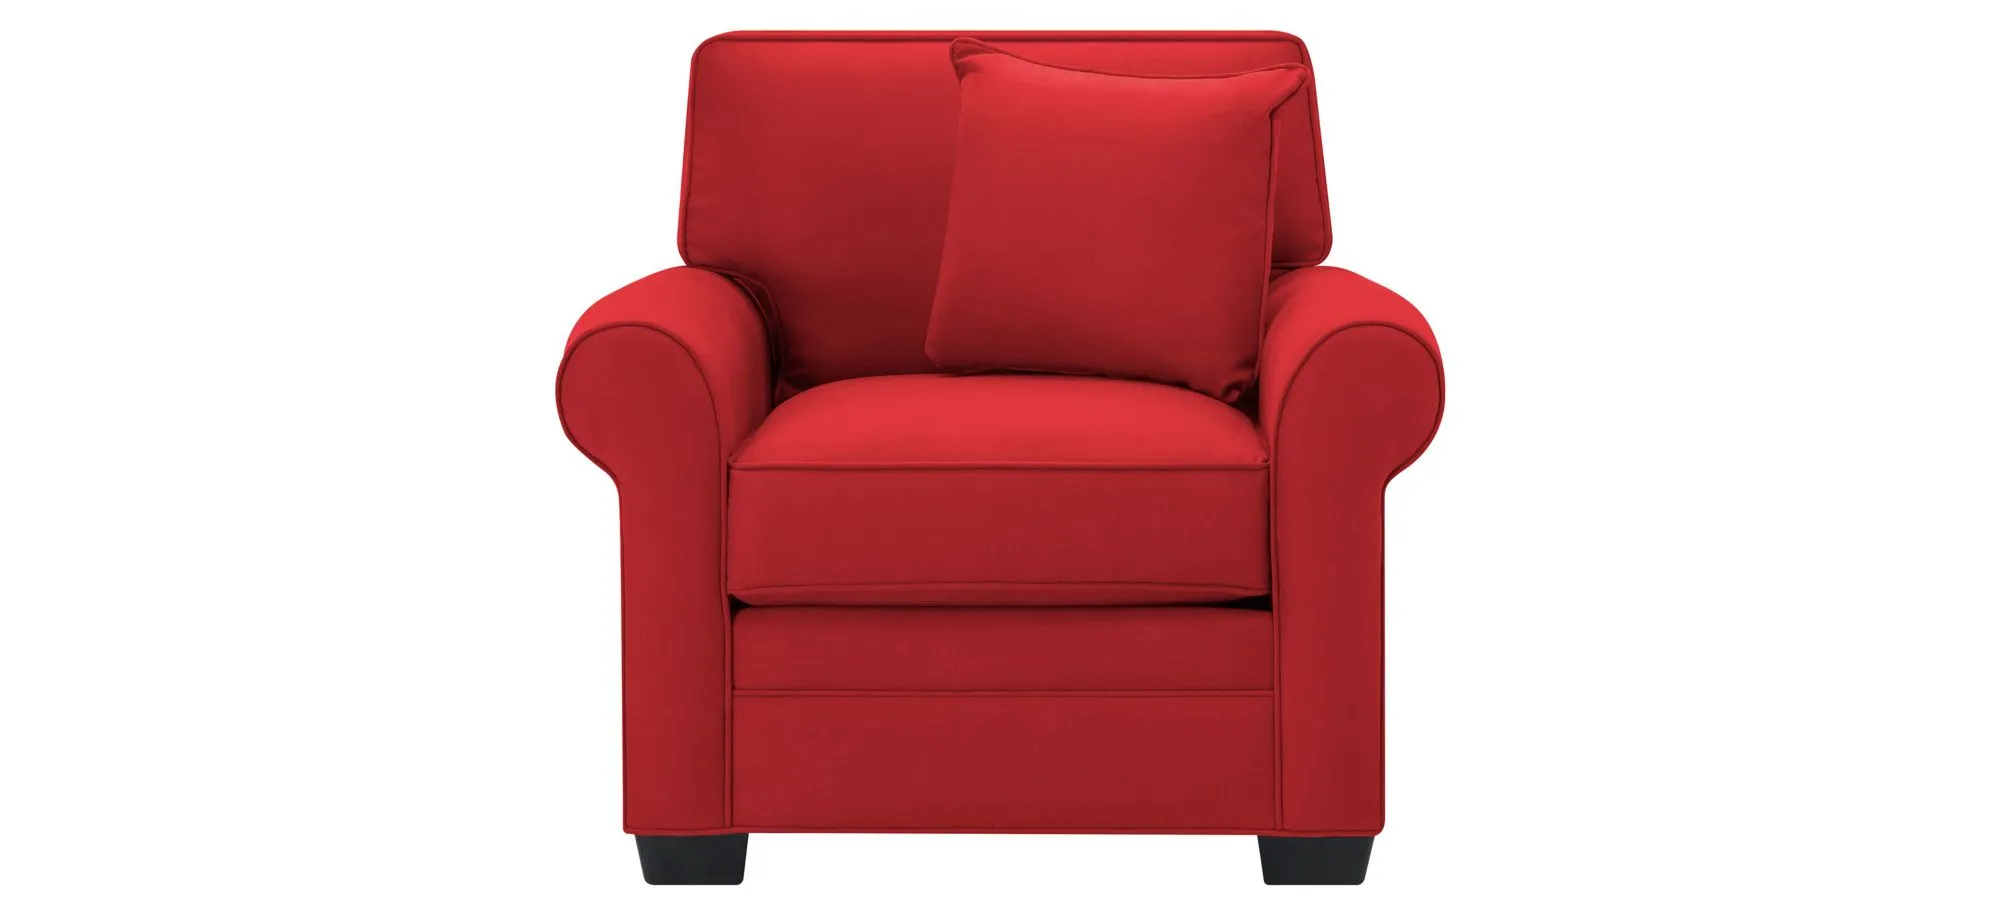 Glendora Chair in Suede So Soft Cardinal by H.M. Richards